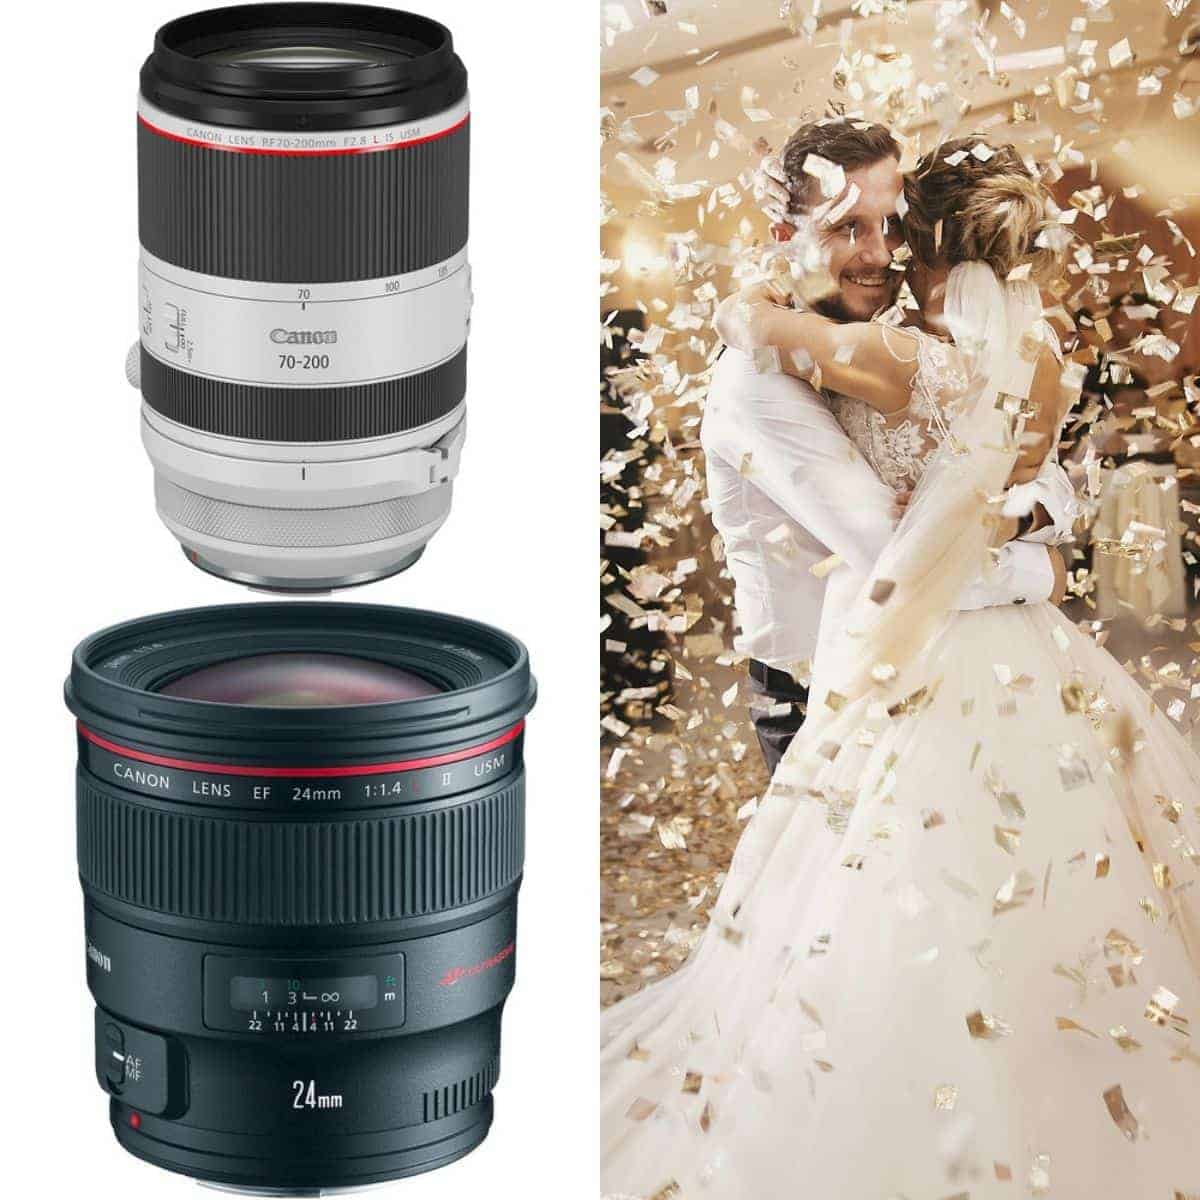 Two camera lenses and a couple celebrating their wedding.